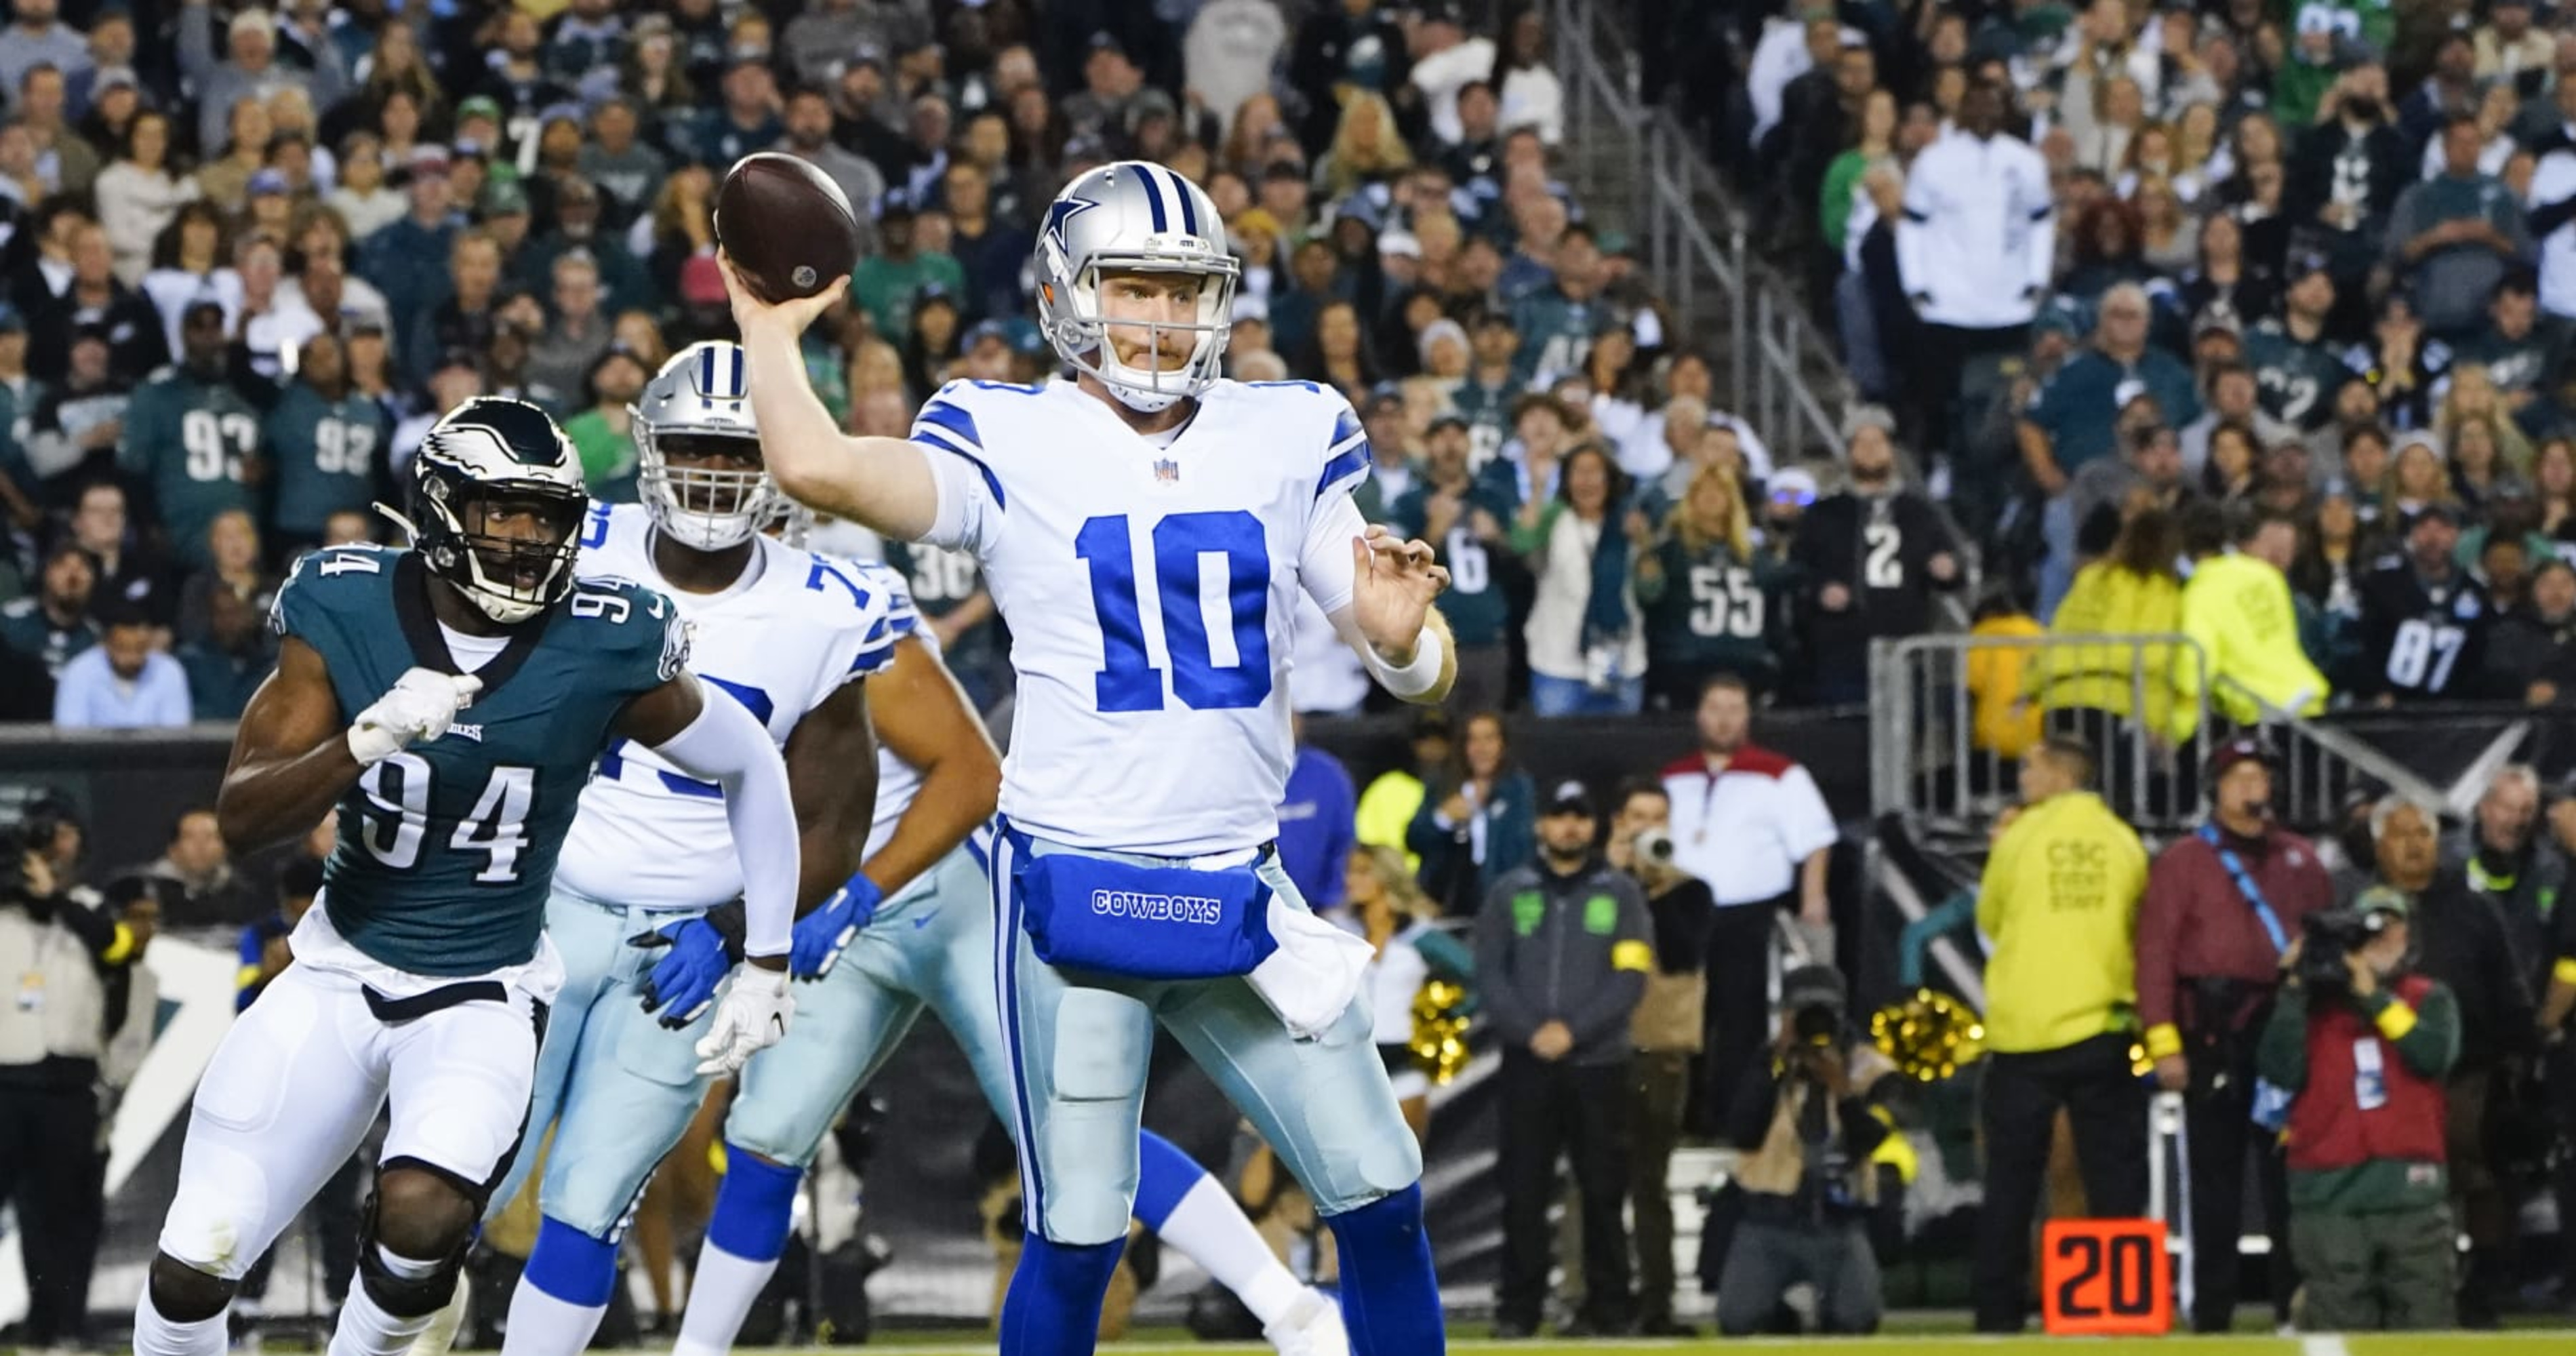 CBS Sports on X: Cooper Rush is the first QB to start his